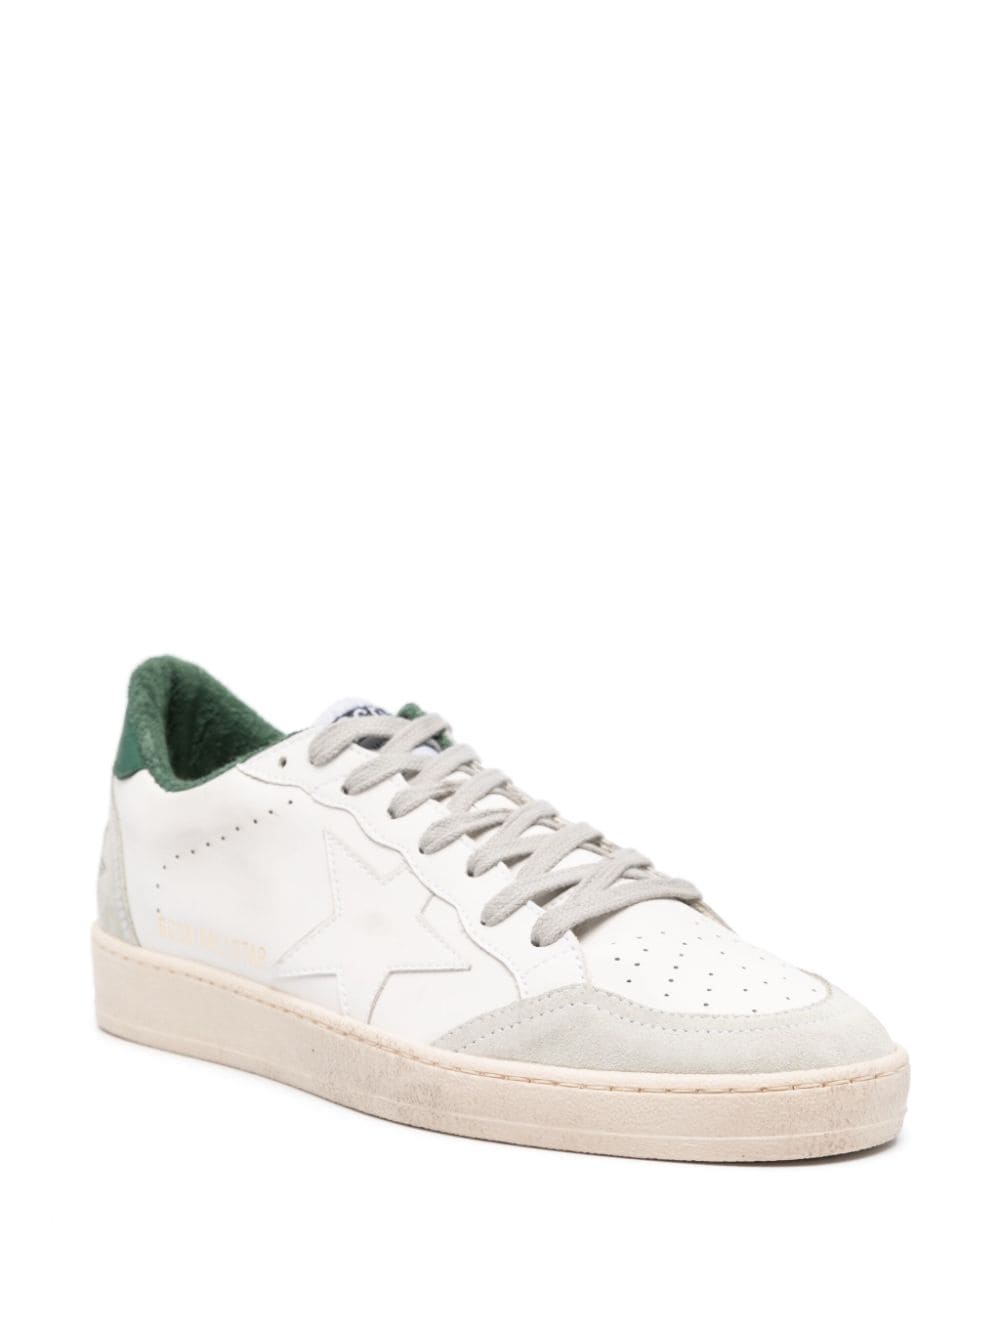 Shop Golden Goose Ball Star Leather Sneakers In Grün